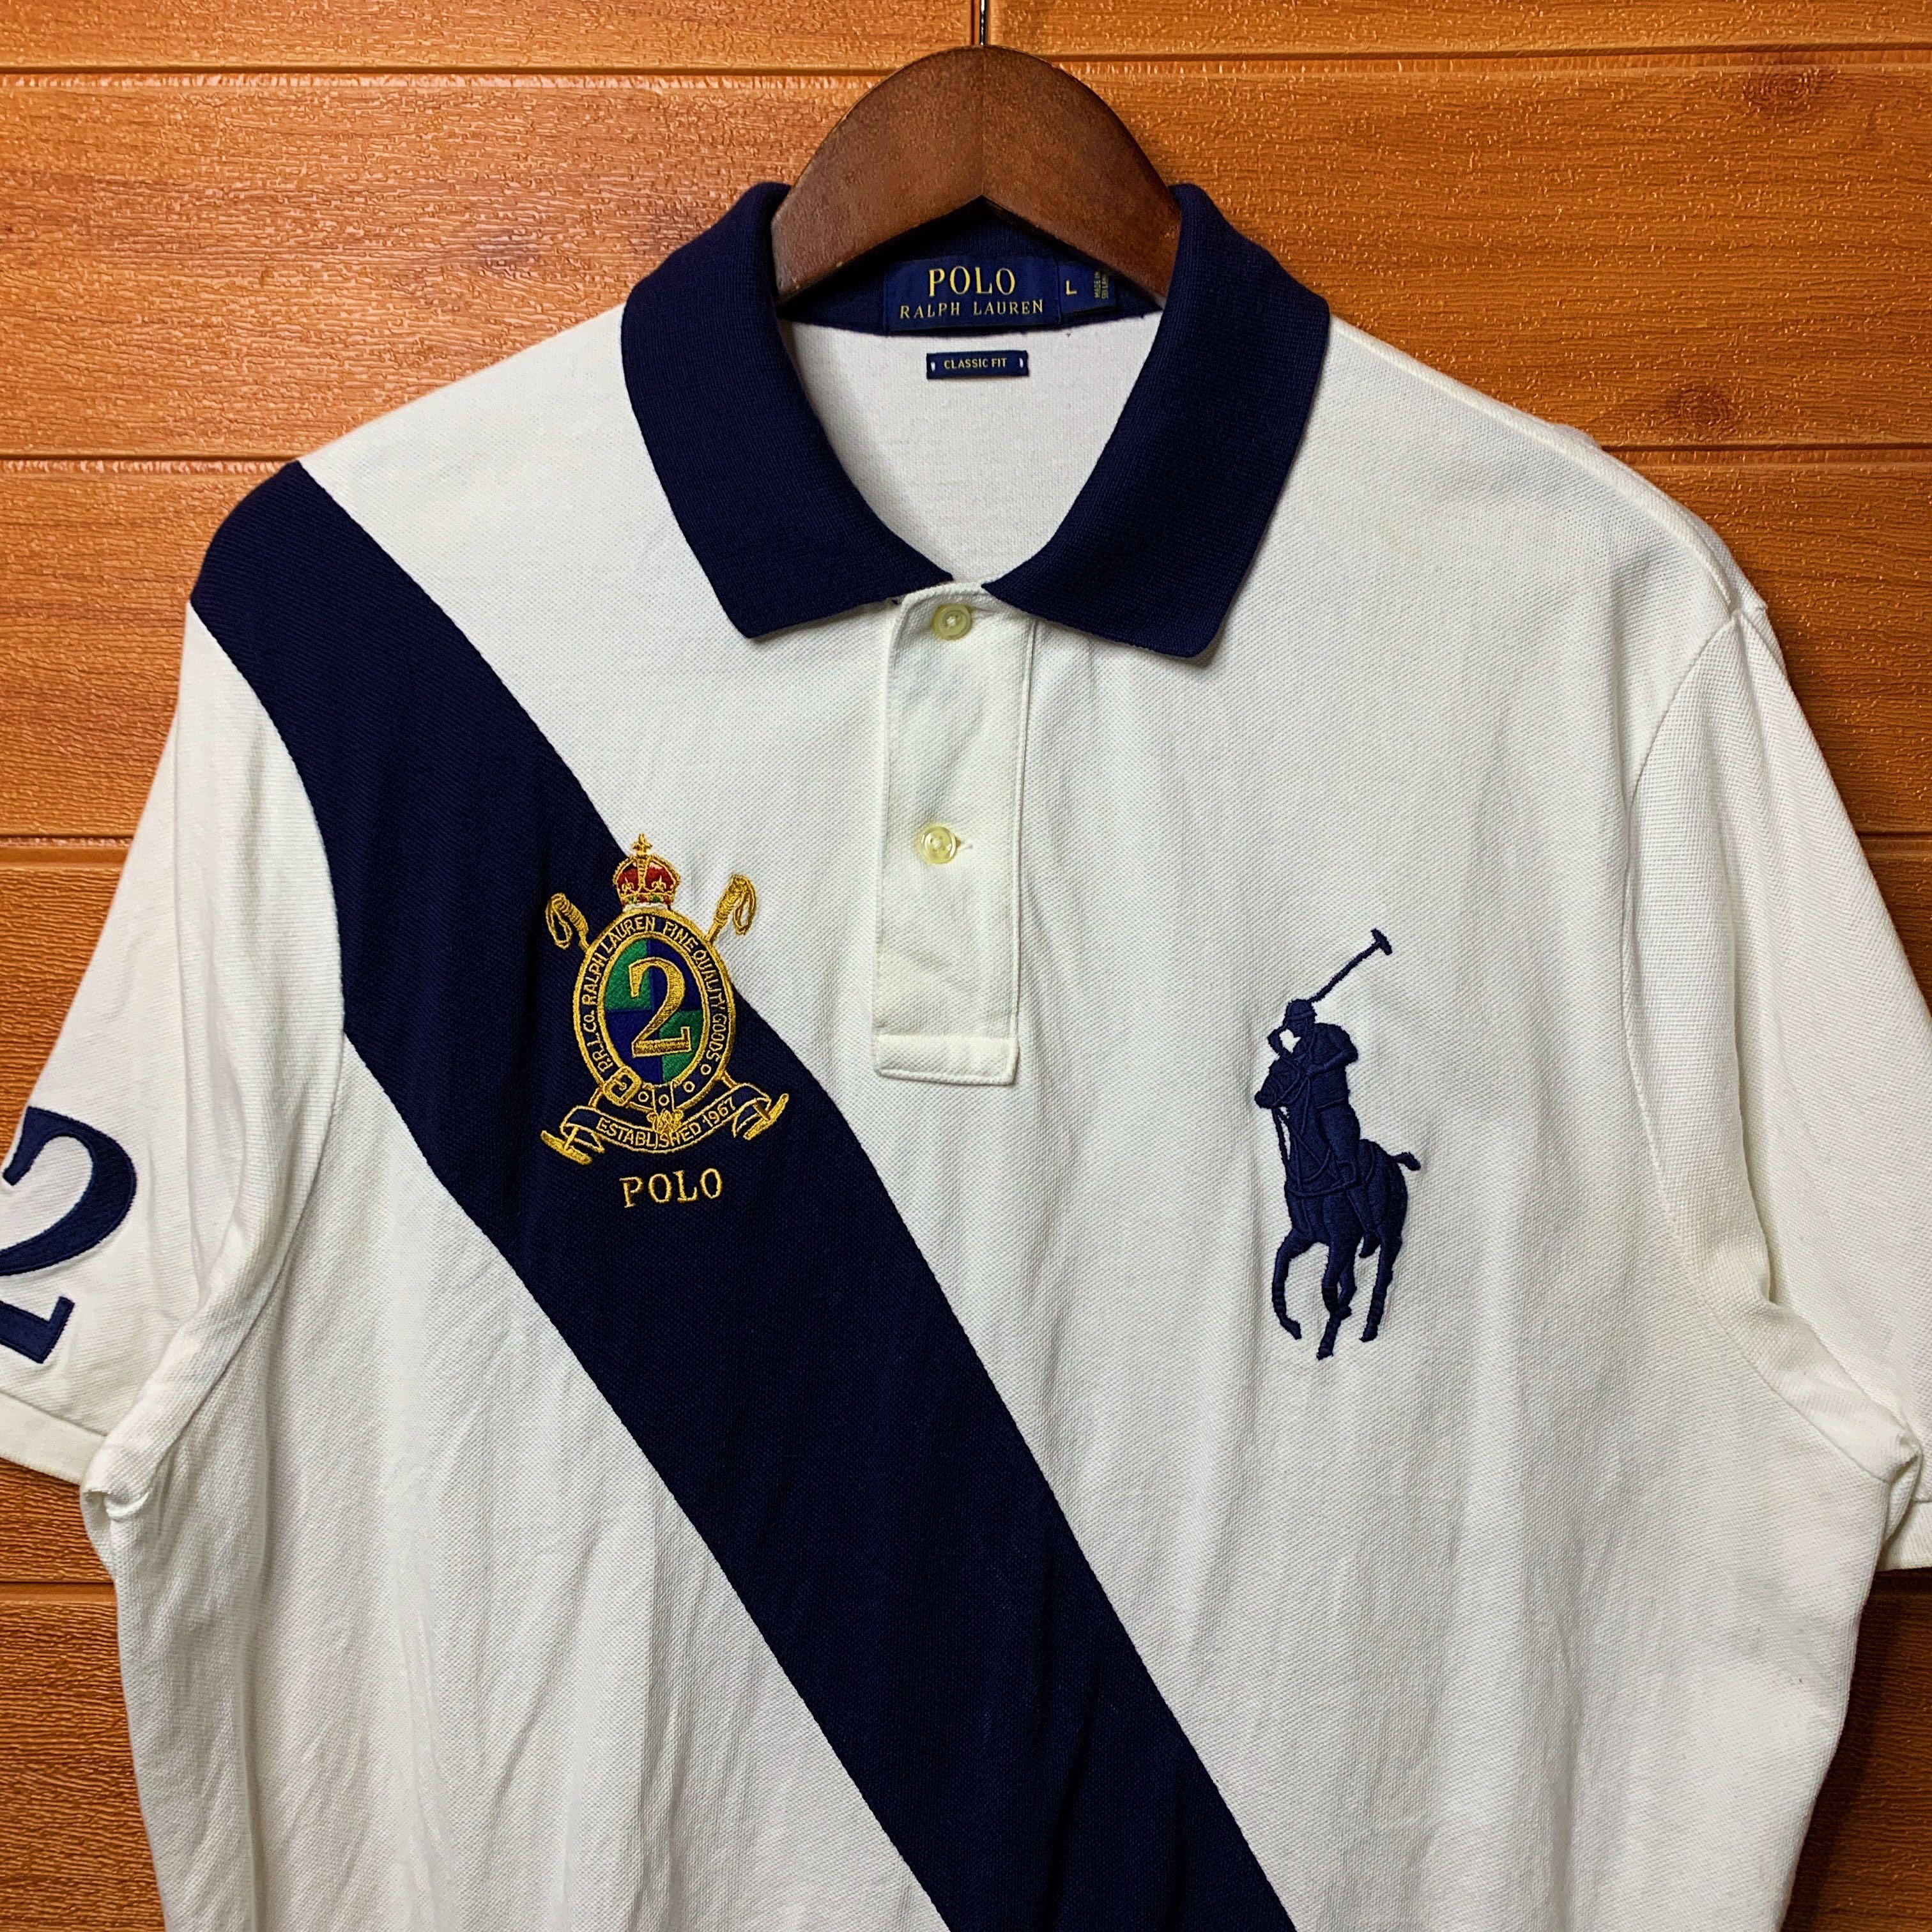 Ralph Lauren celebrates its greatest icon, the polo shirt, in a